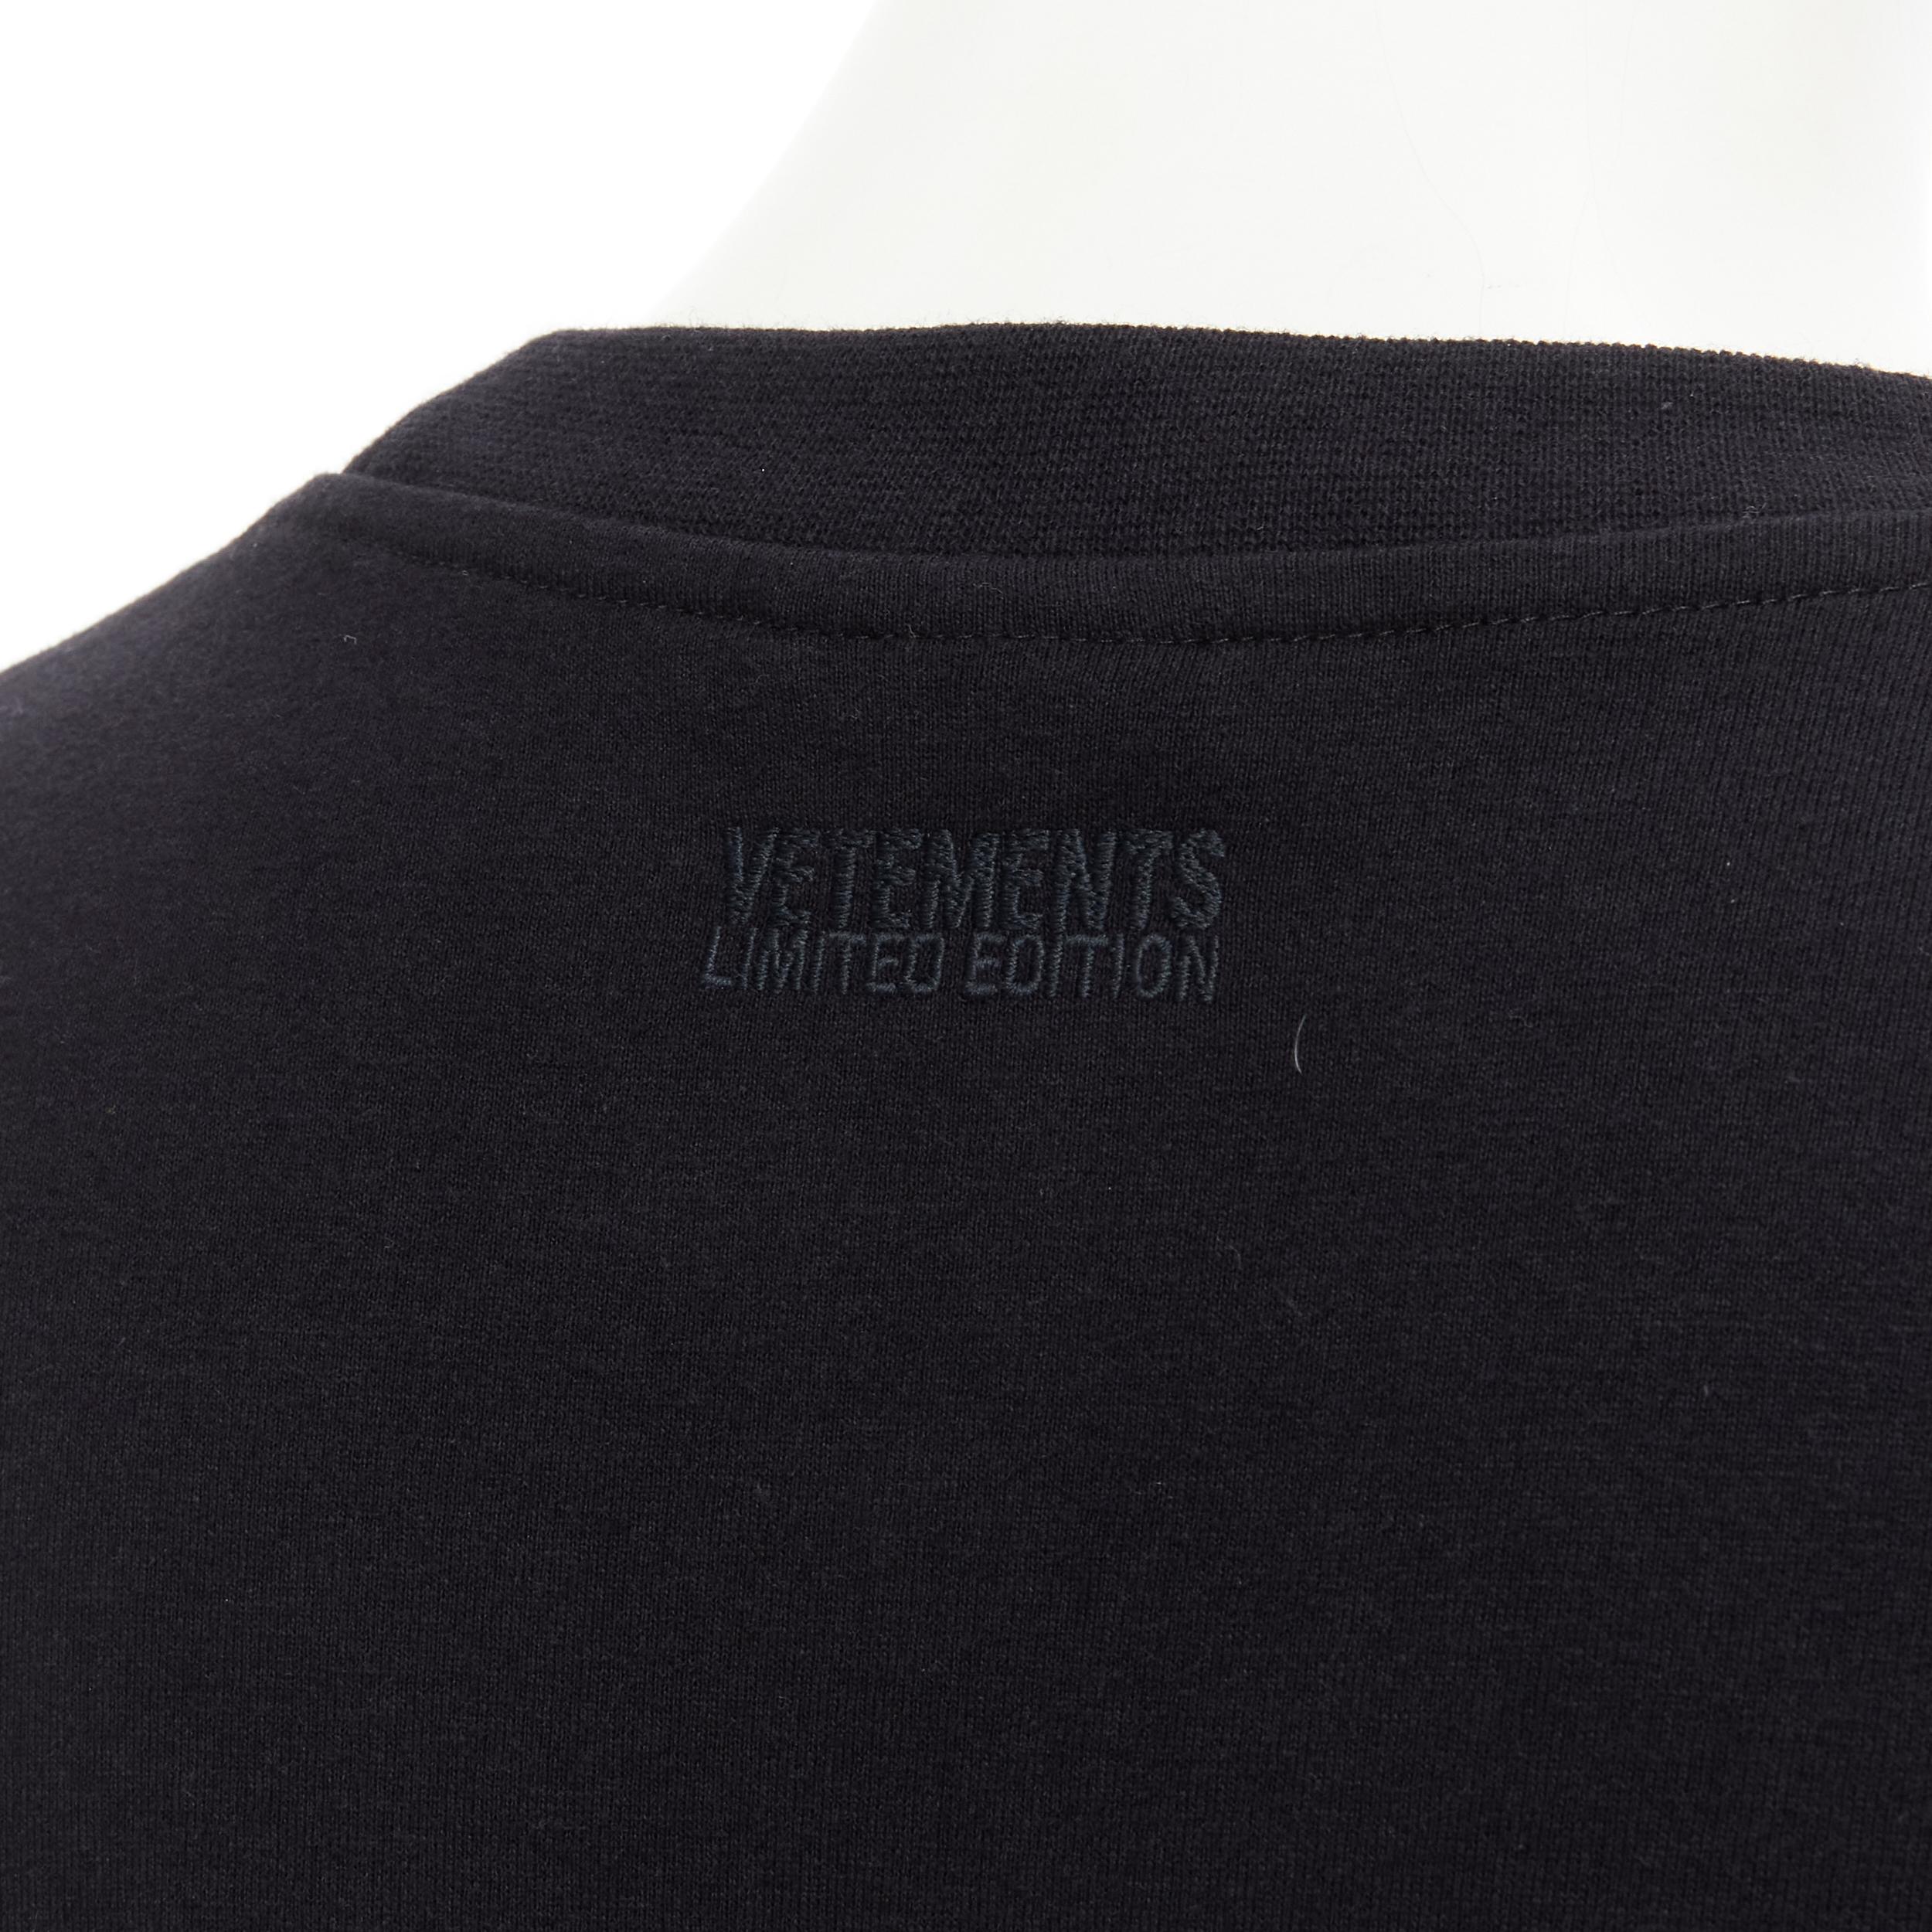 Women's VETEMENTS Friends logo embroidered Limited Edition black cotton unisex long  For Sale